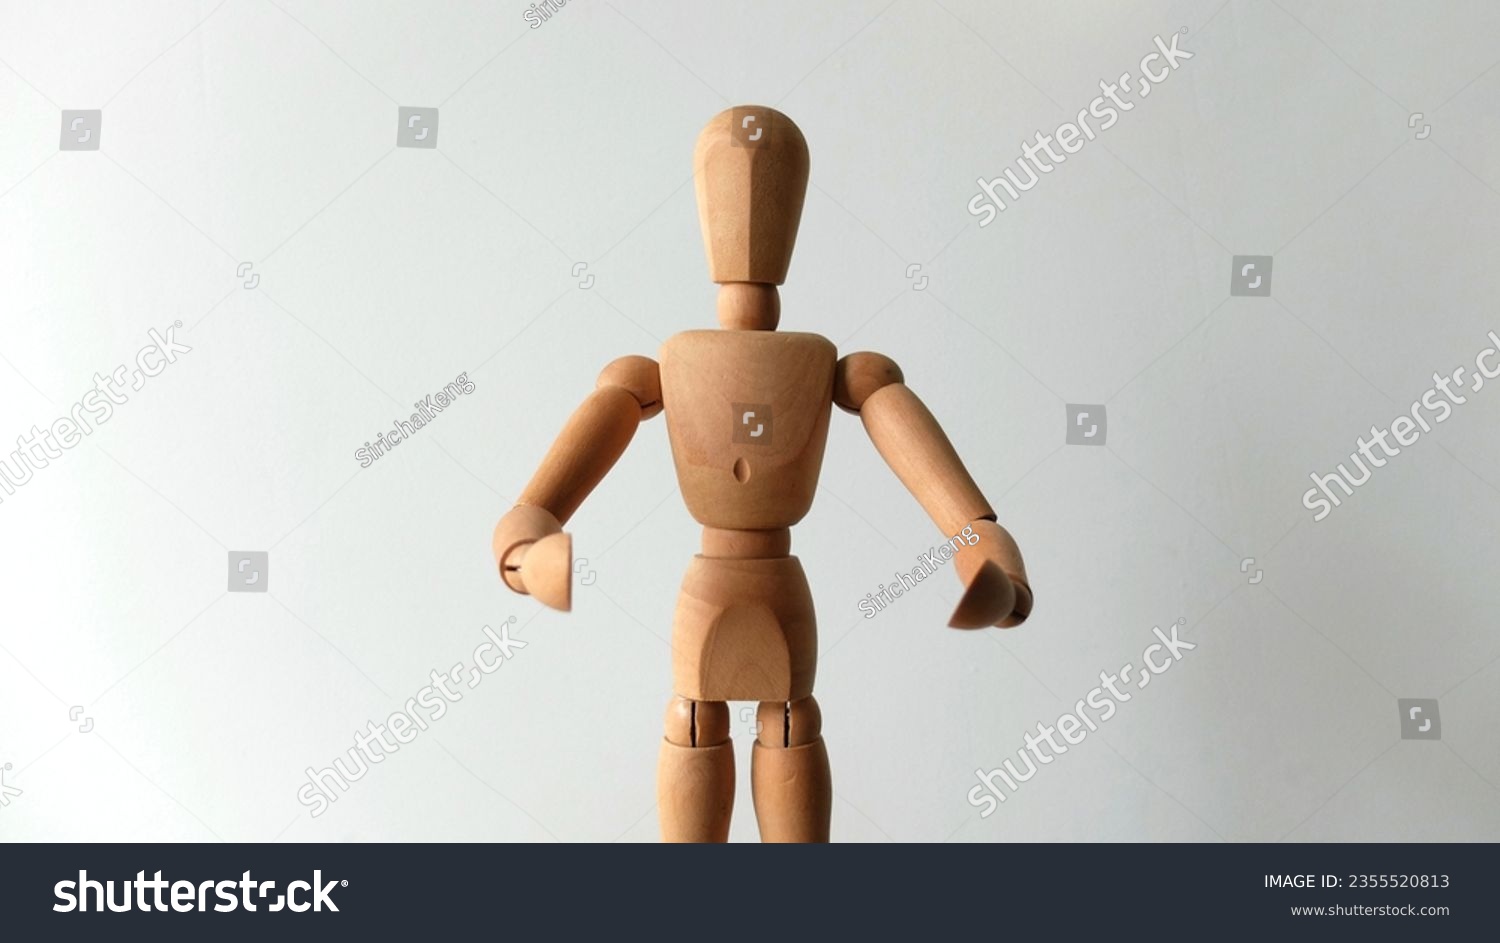 Wooden Human, Human Toy, Activity, Presentation, Copy Space..., #2355520813